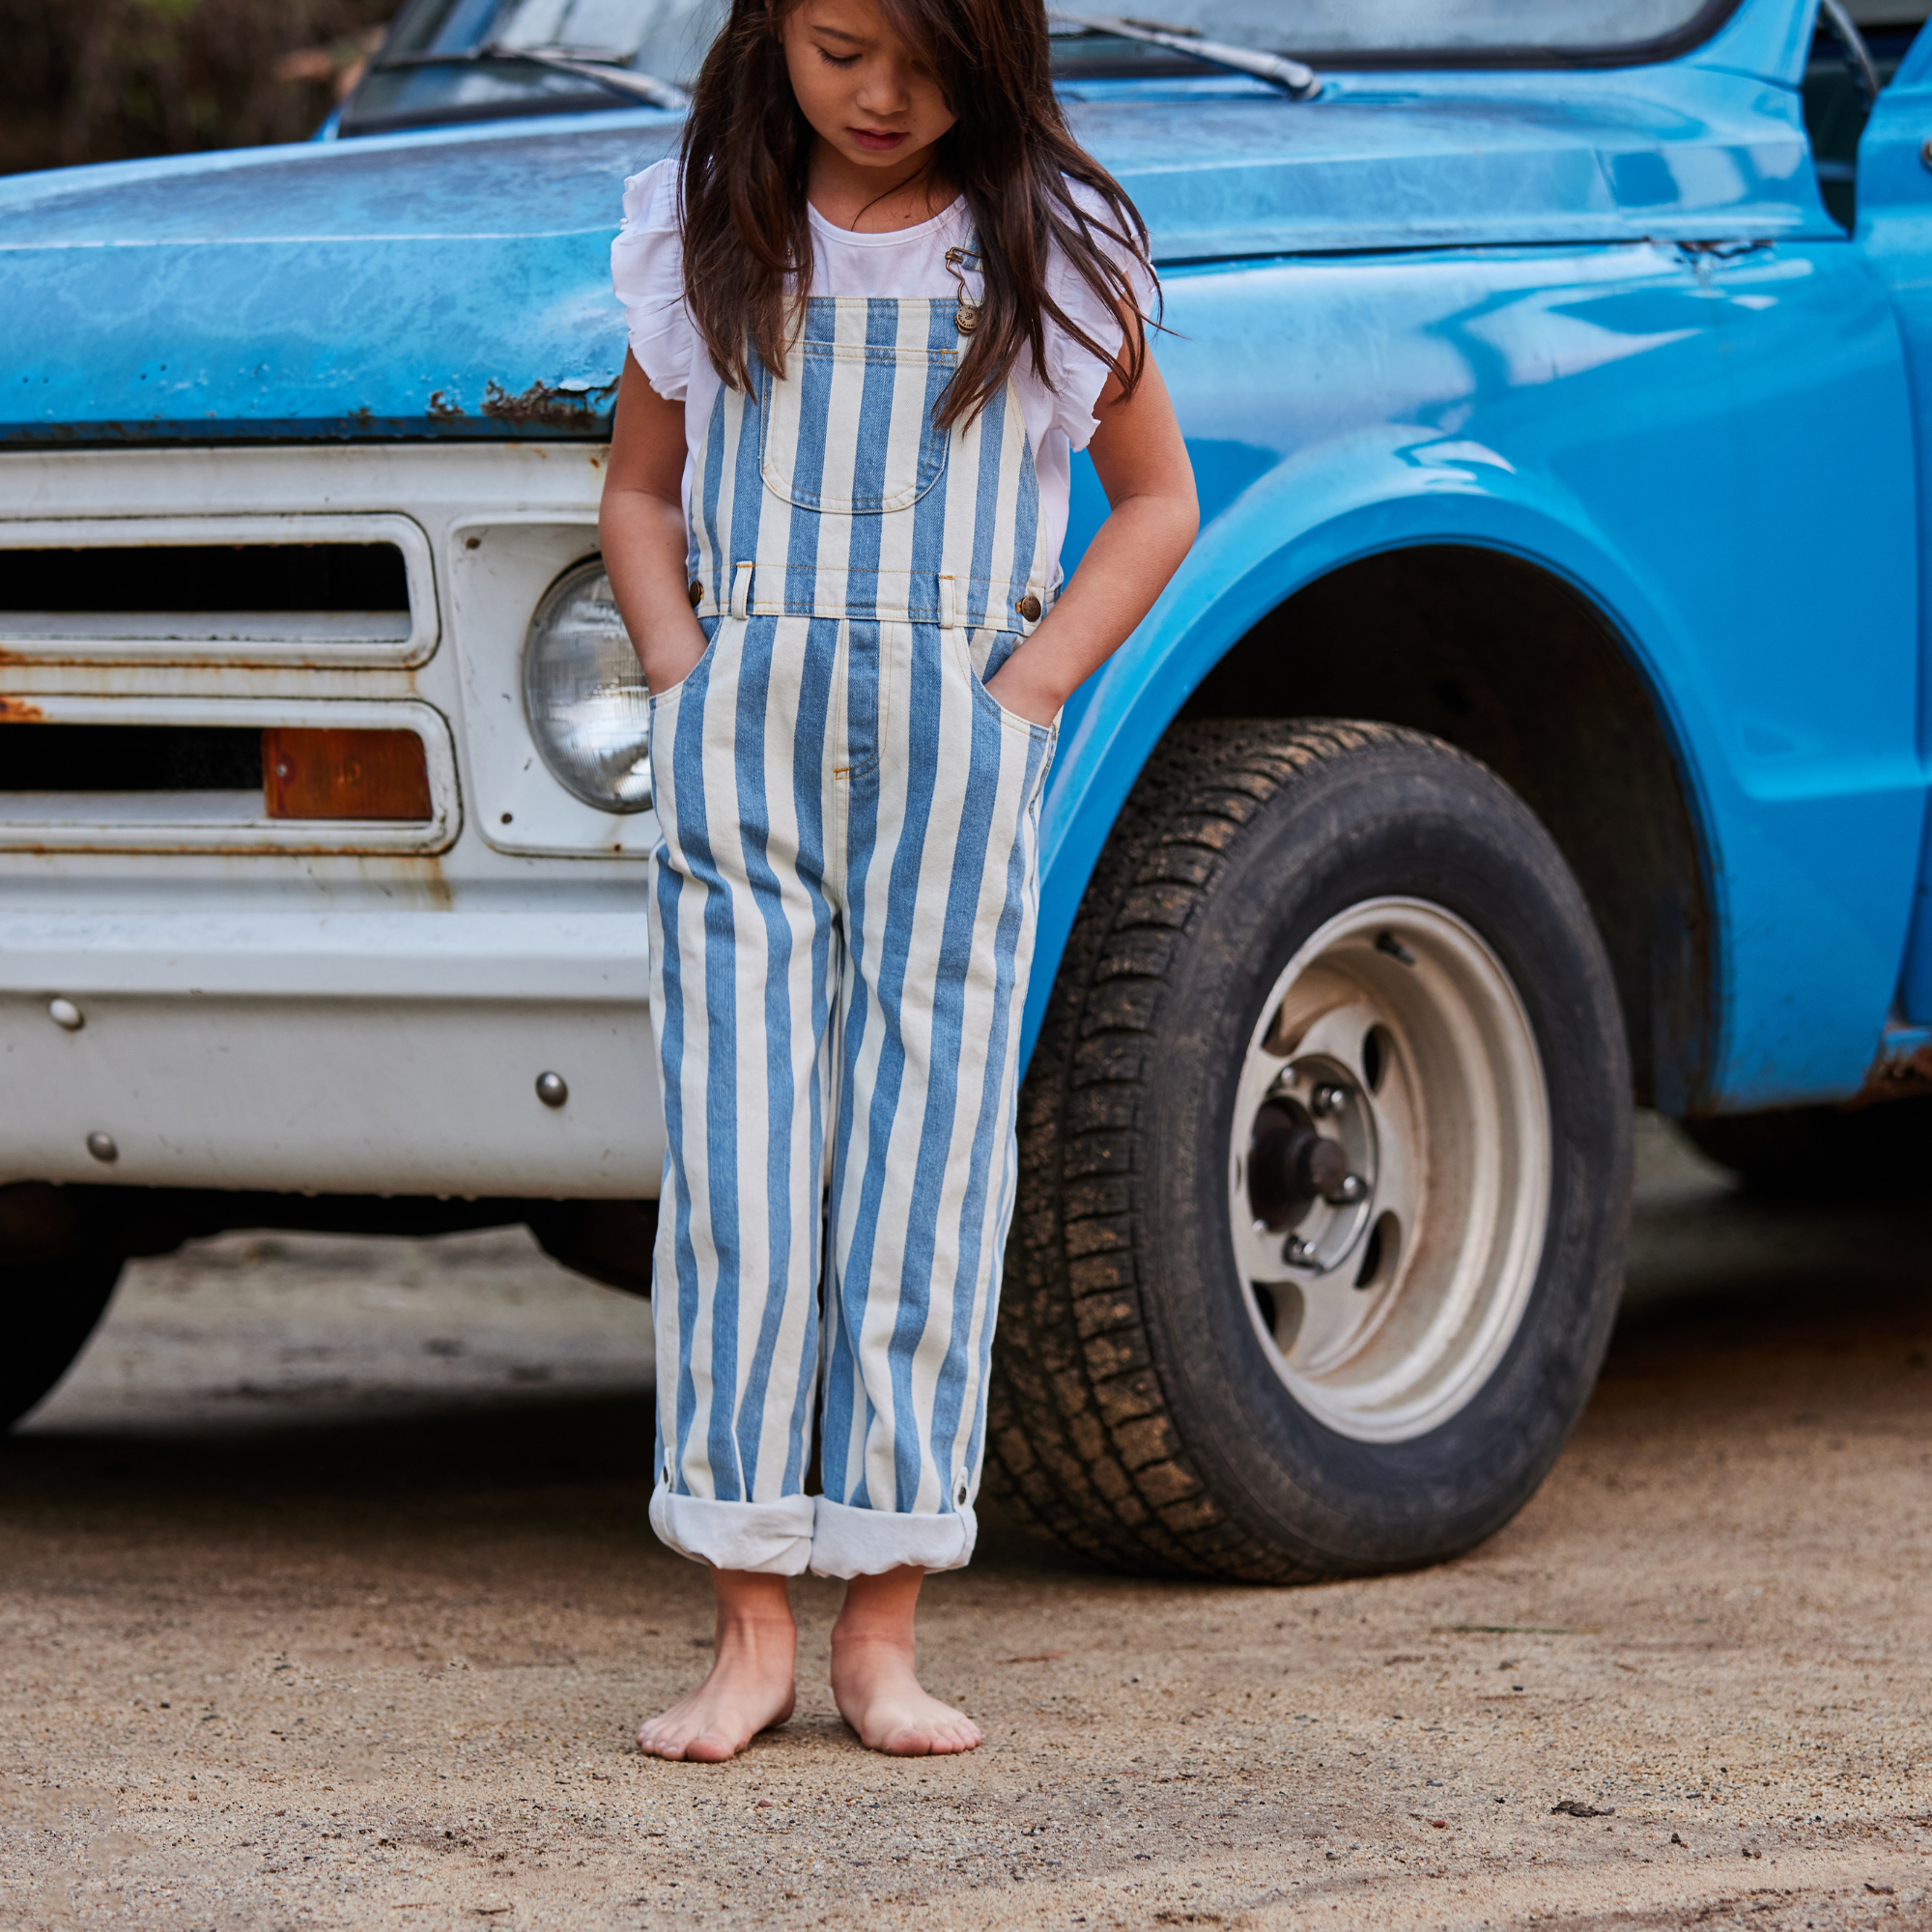 Classic Wide Stripe Dungarees - Blue